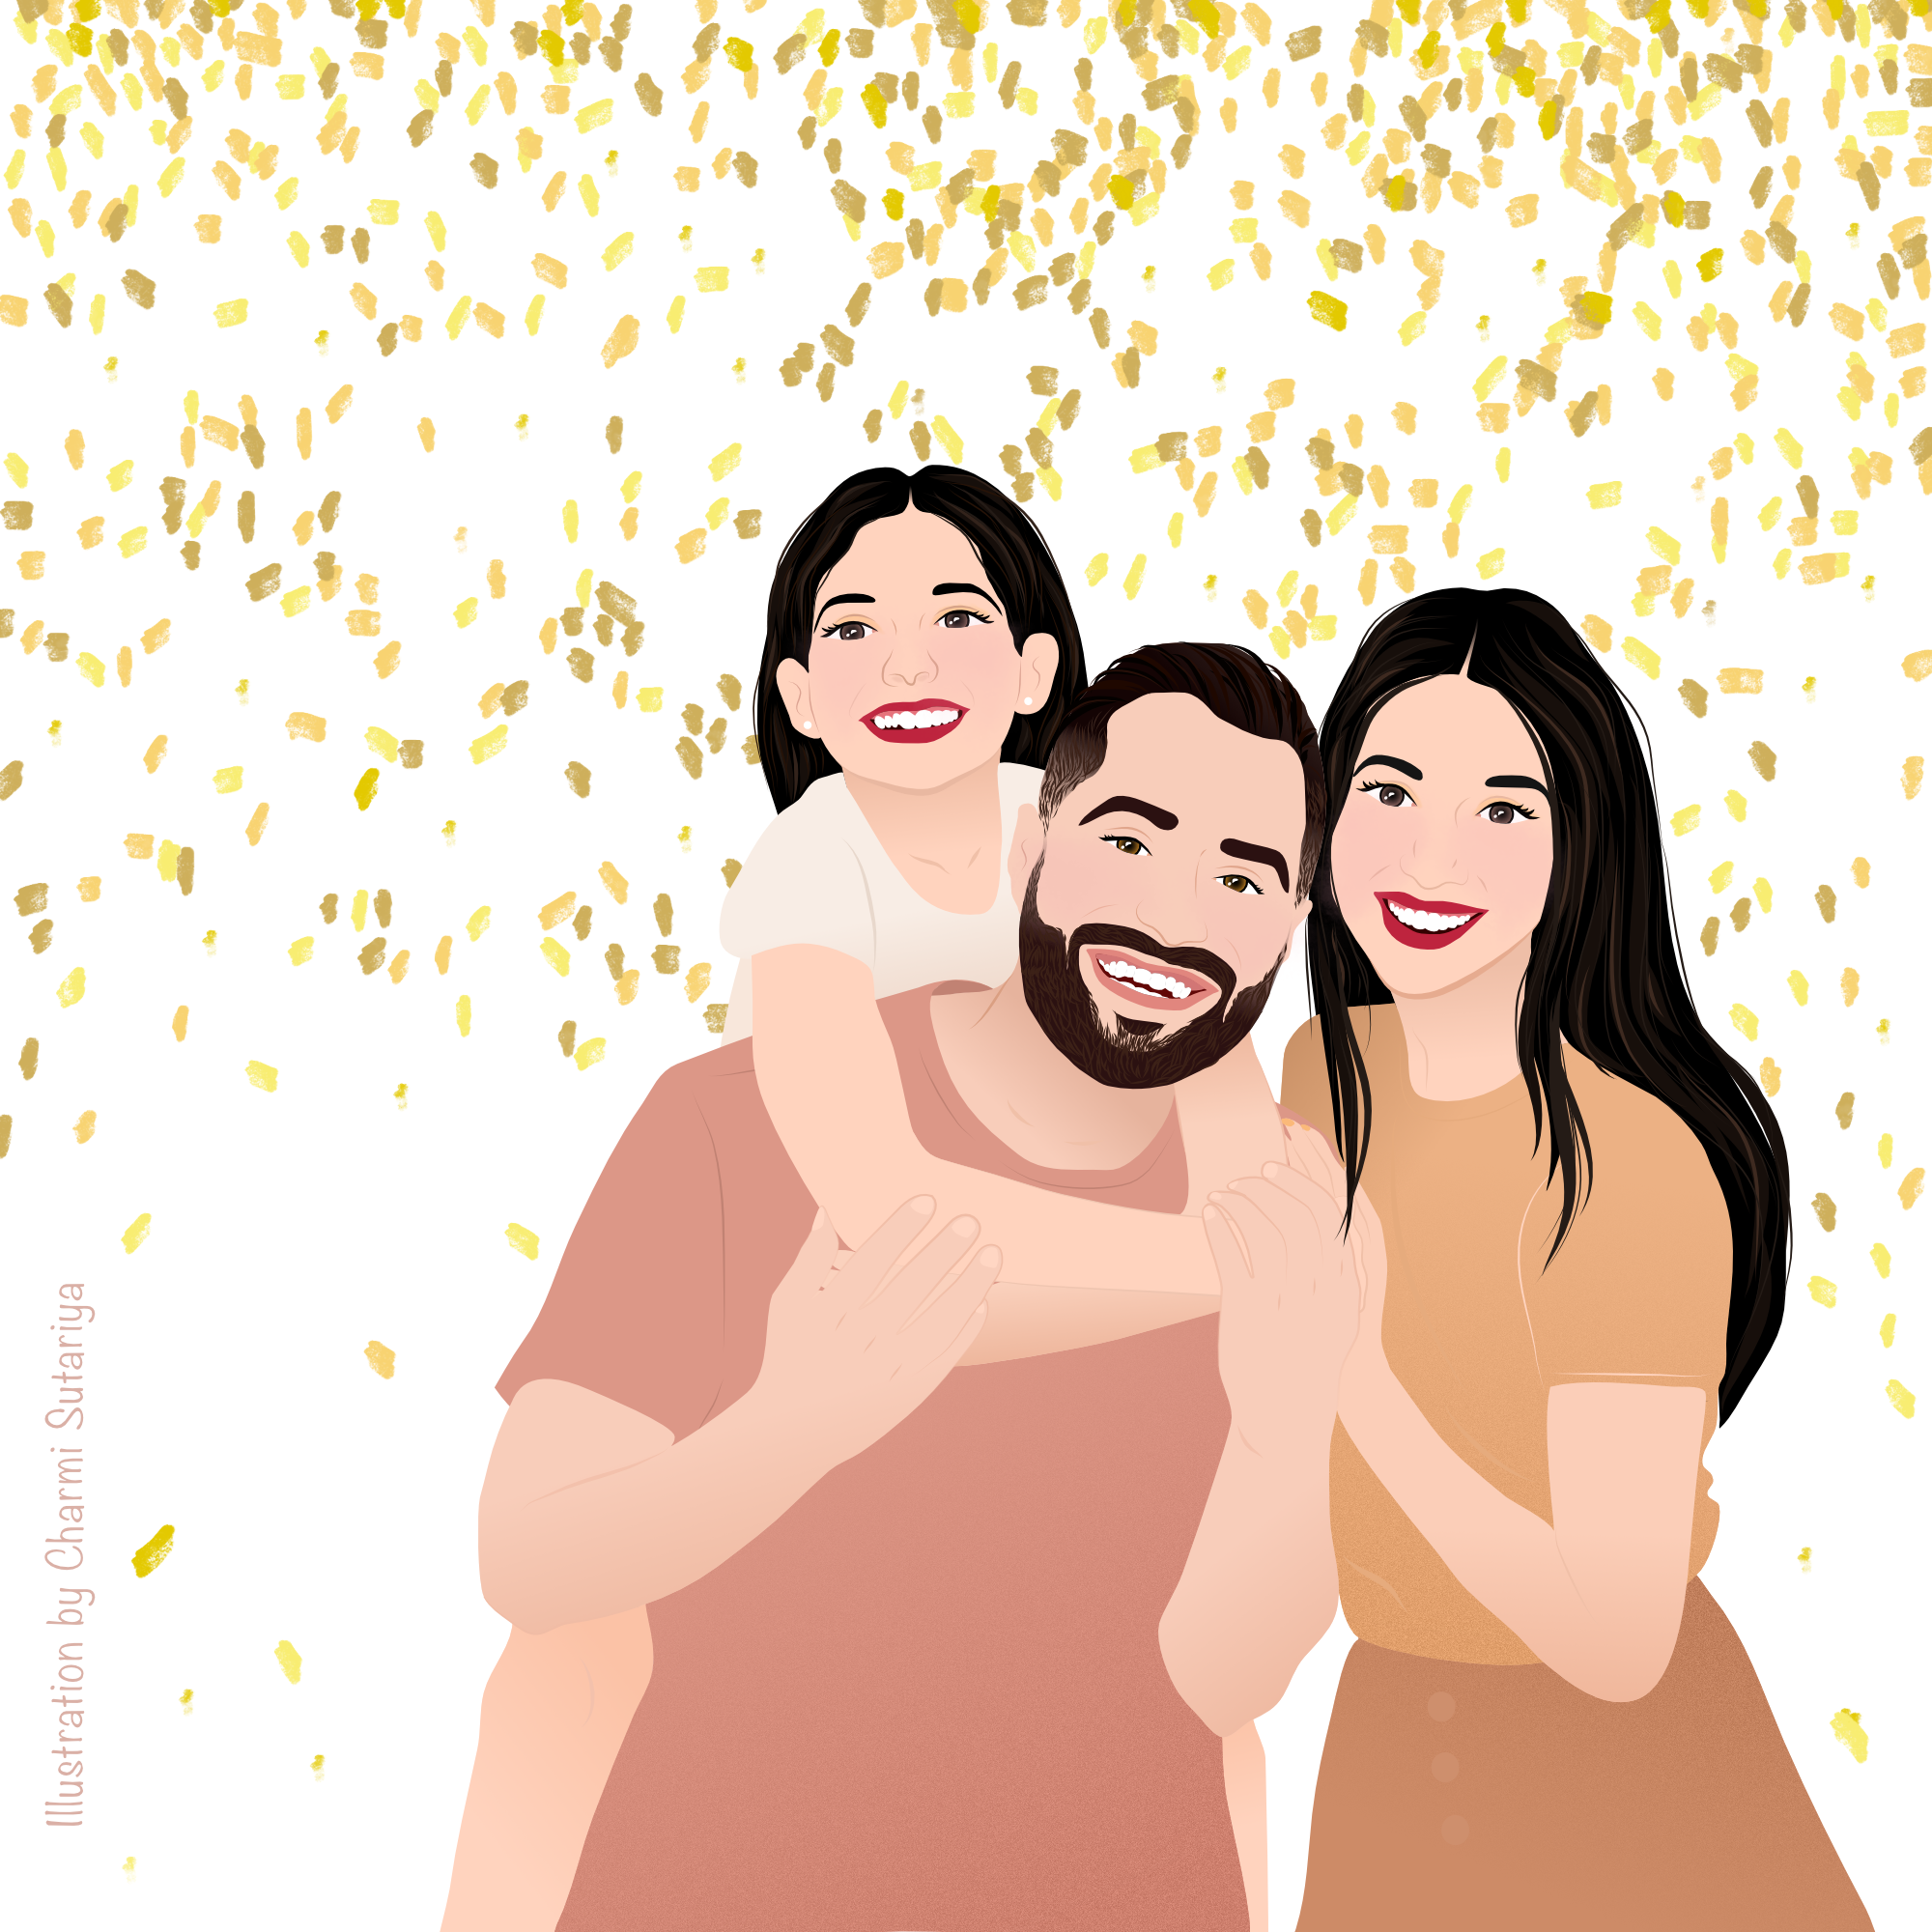 A family portrait illustration of a husband and wife with their lovely daughter.